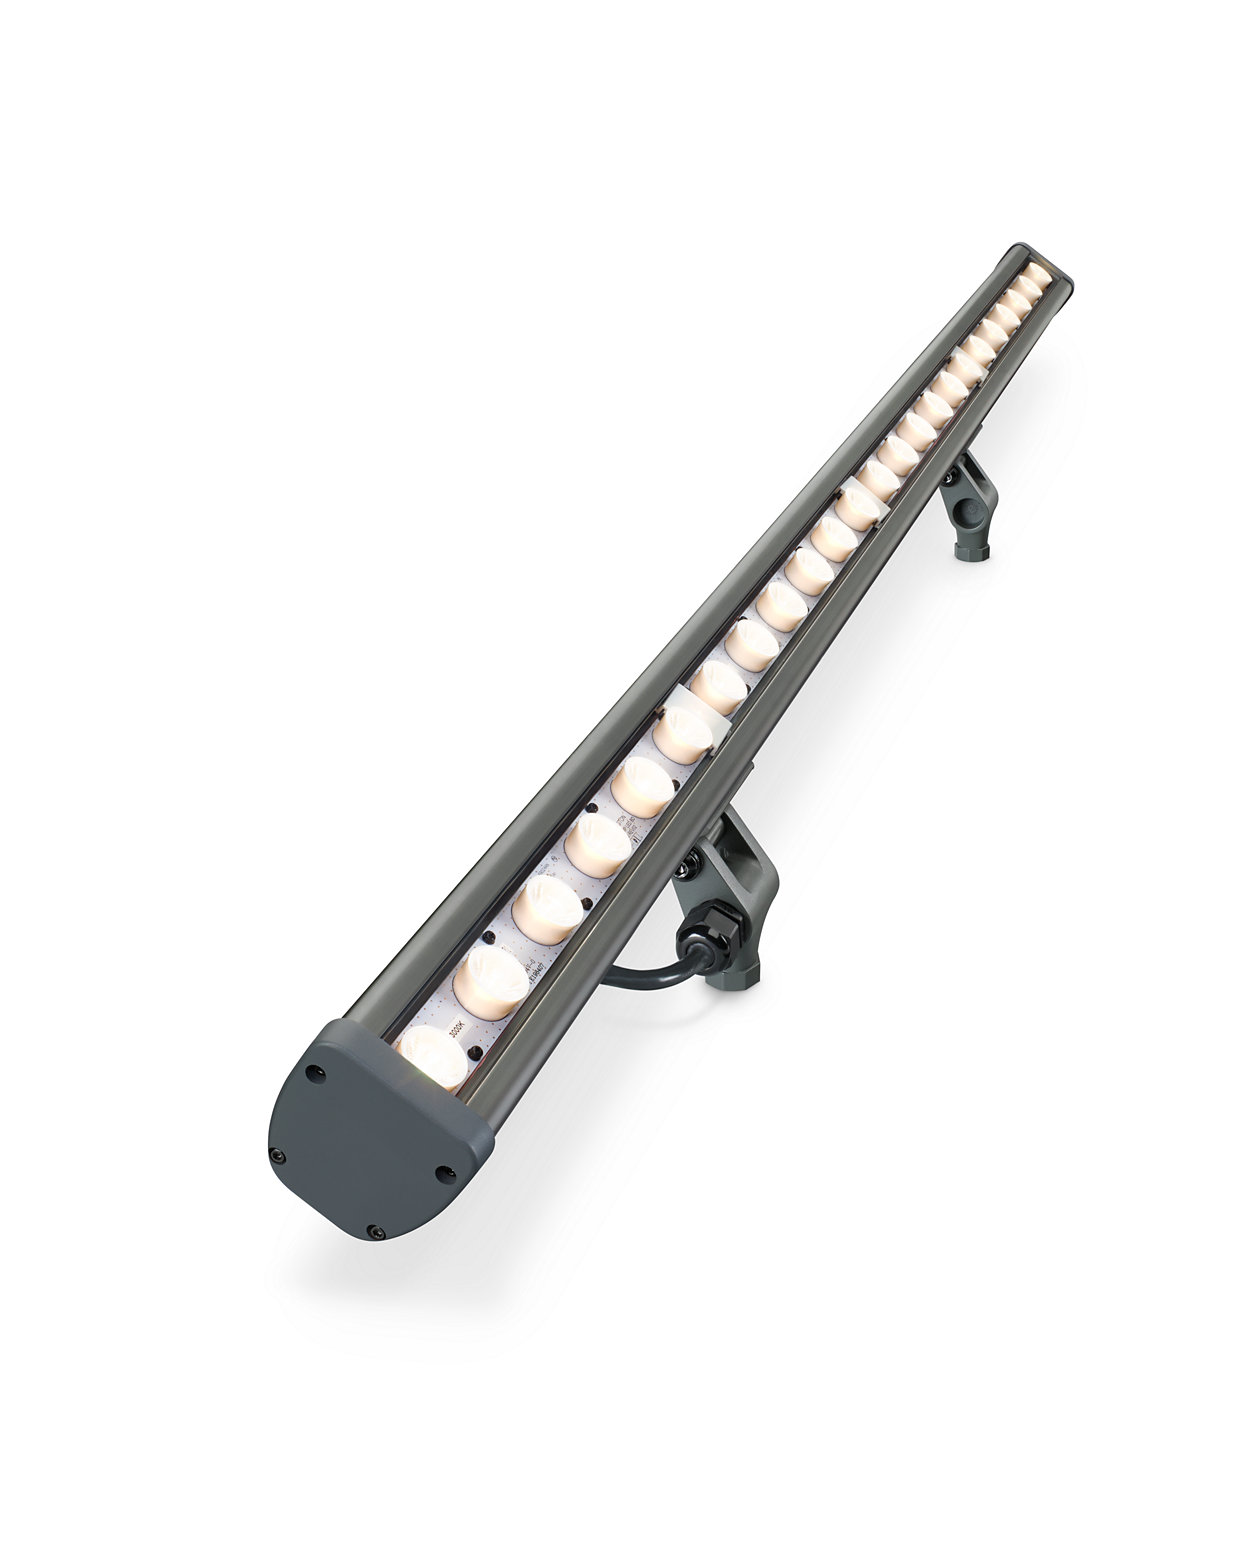 Vaya Linear MP – reliable, cost-effective LED linear fixture